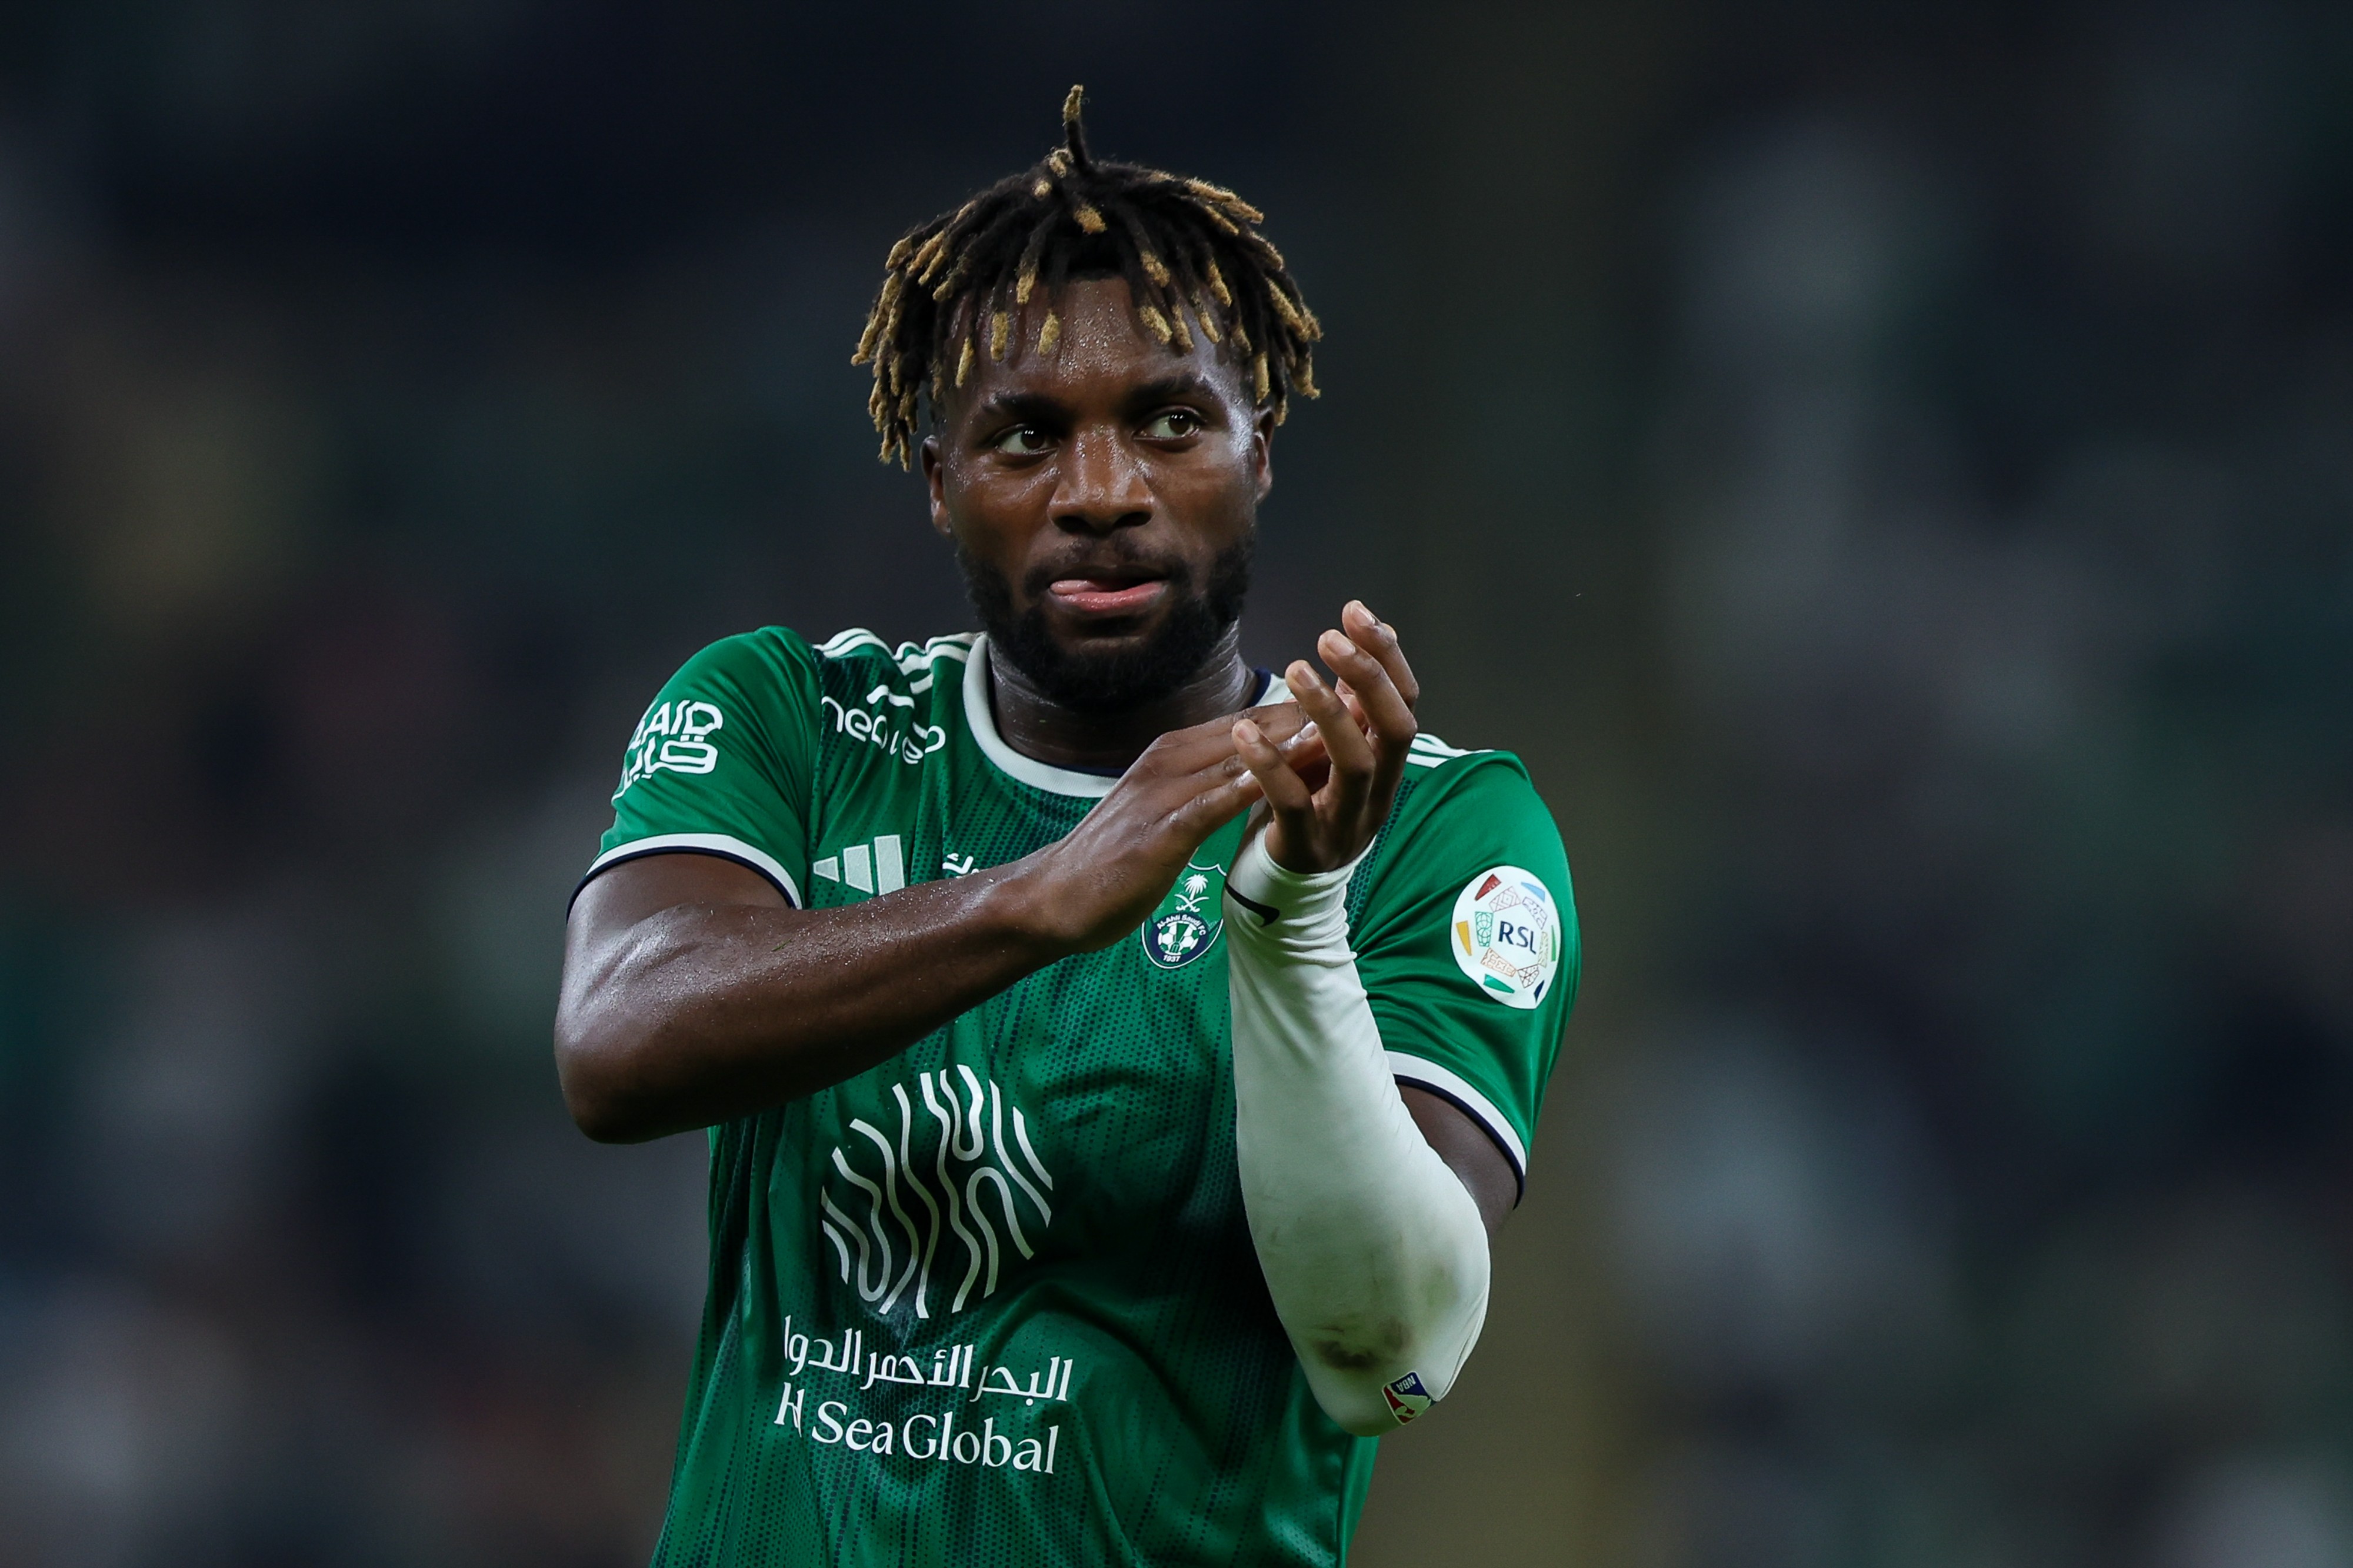 Allan Saint-Maximin’s unexpected career twist just a year after leaving Newcastle